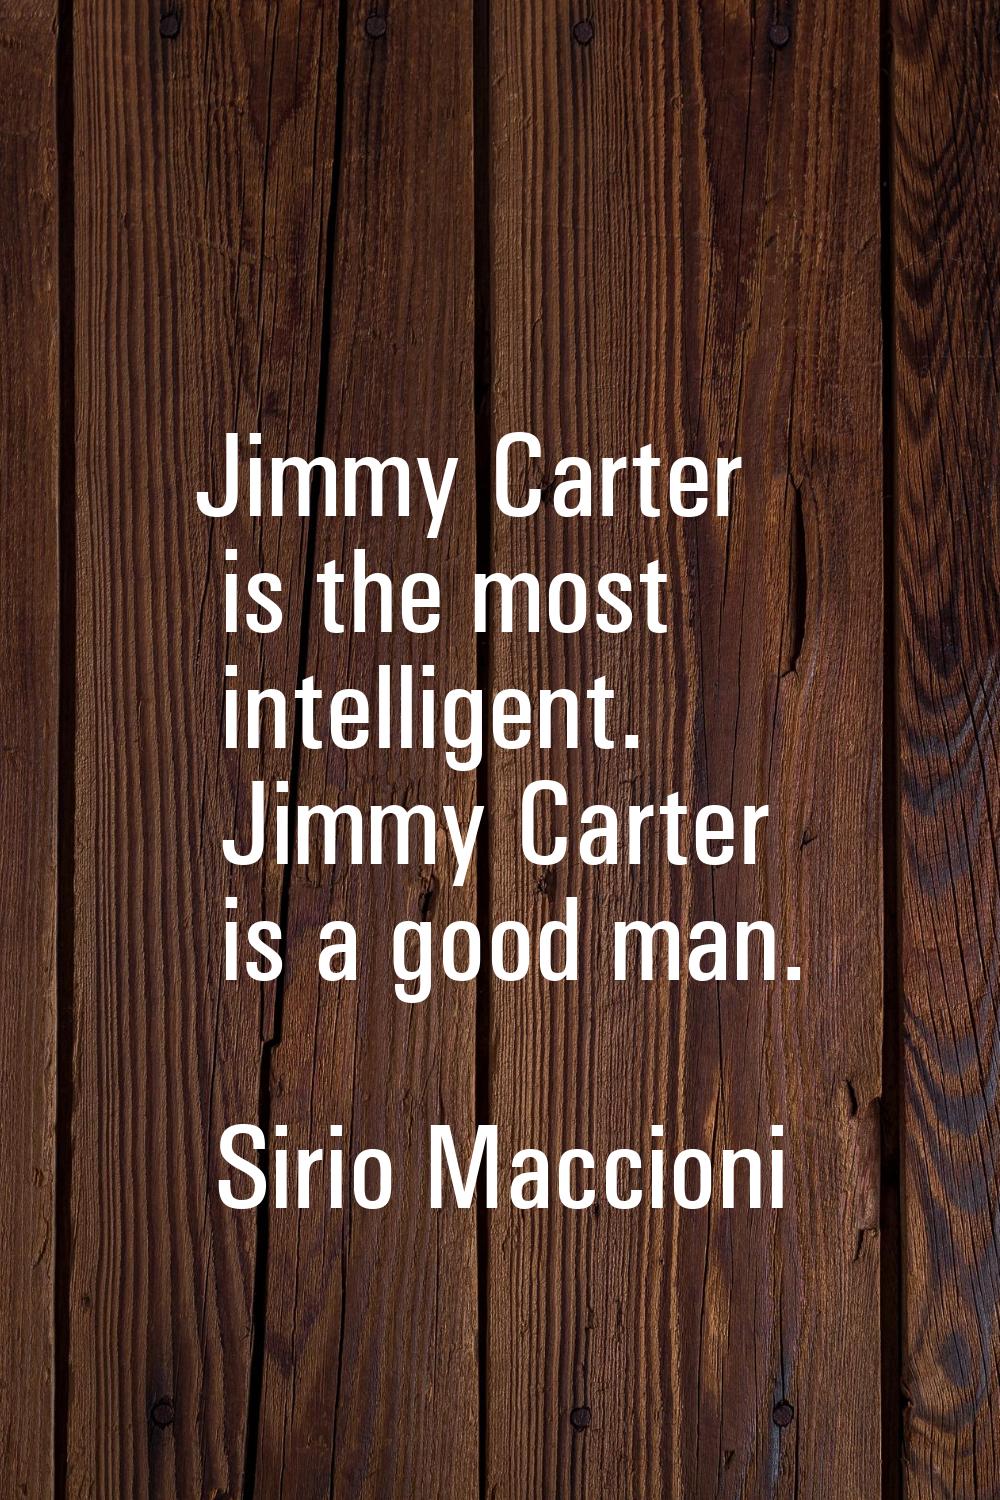 Jimmy Carter is the most intelligent. Jimmy Carter is a good man.